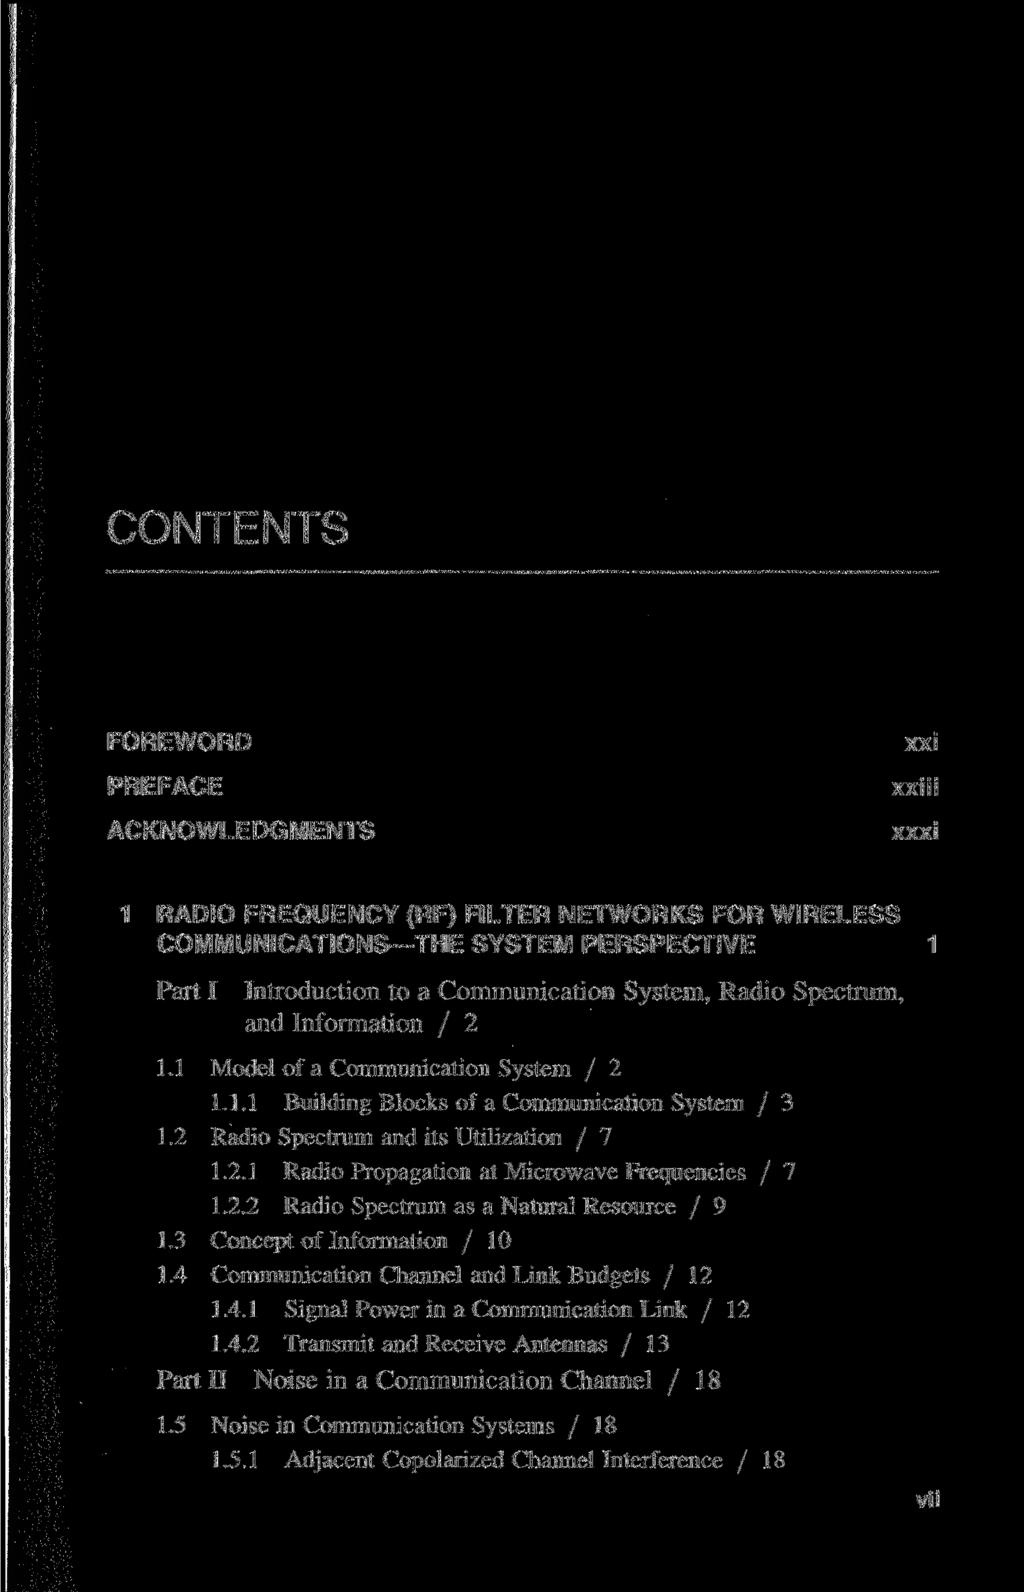 FOREWORD PREFACE ACKNOWLEDGMENTS xxi xxiii xxxi 1 RADIO FREQUENCY (RF) FILTER NETWORKS FOR WIRELESS COMMUNICATIONS THE SYSTEM PERSPECTIVE 1 Part I Introduction to a Communication System, Radio